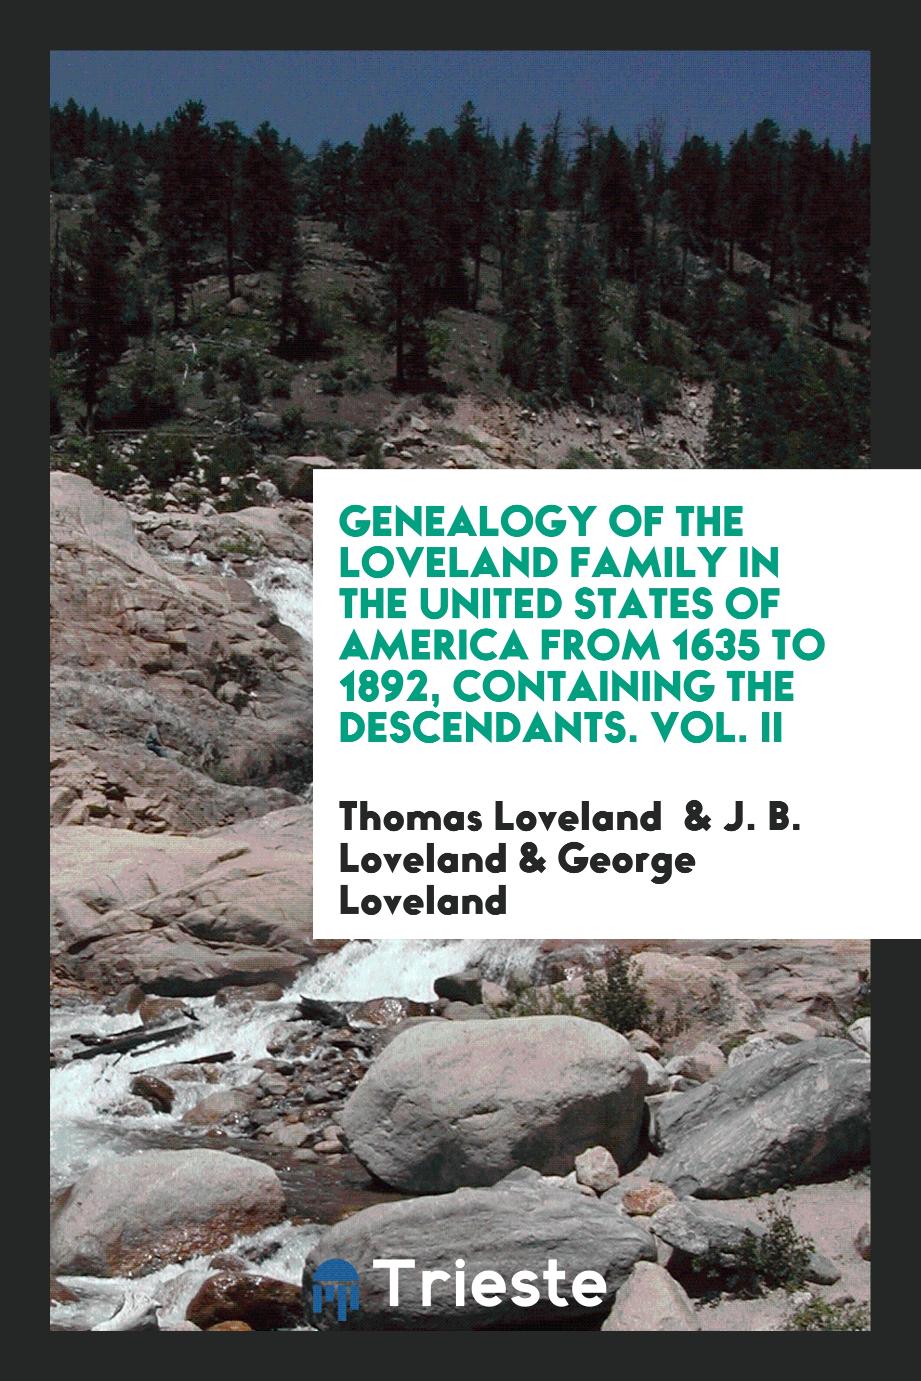 Genealogy of the Loveland Family in the United States of America from 1635 to 1892, Containing the Descendants. Vol. II